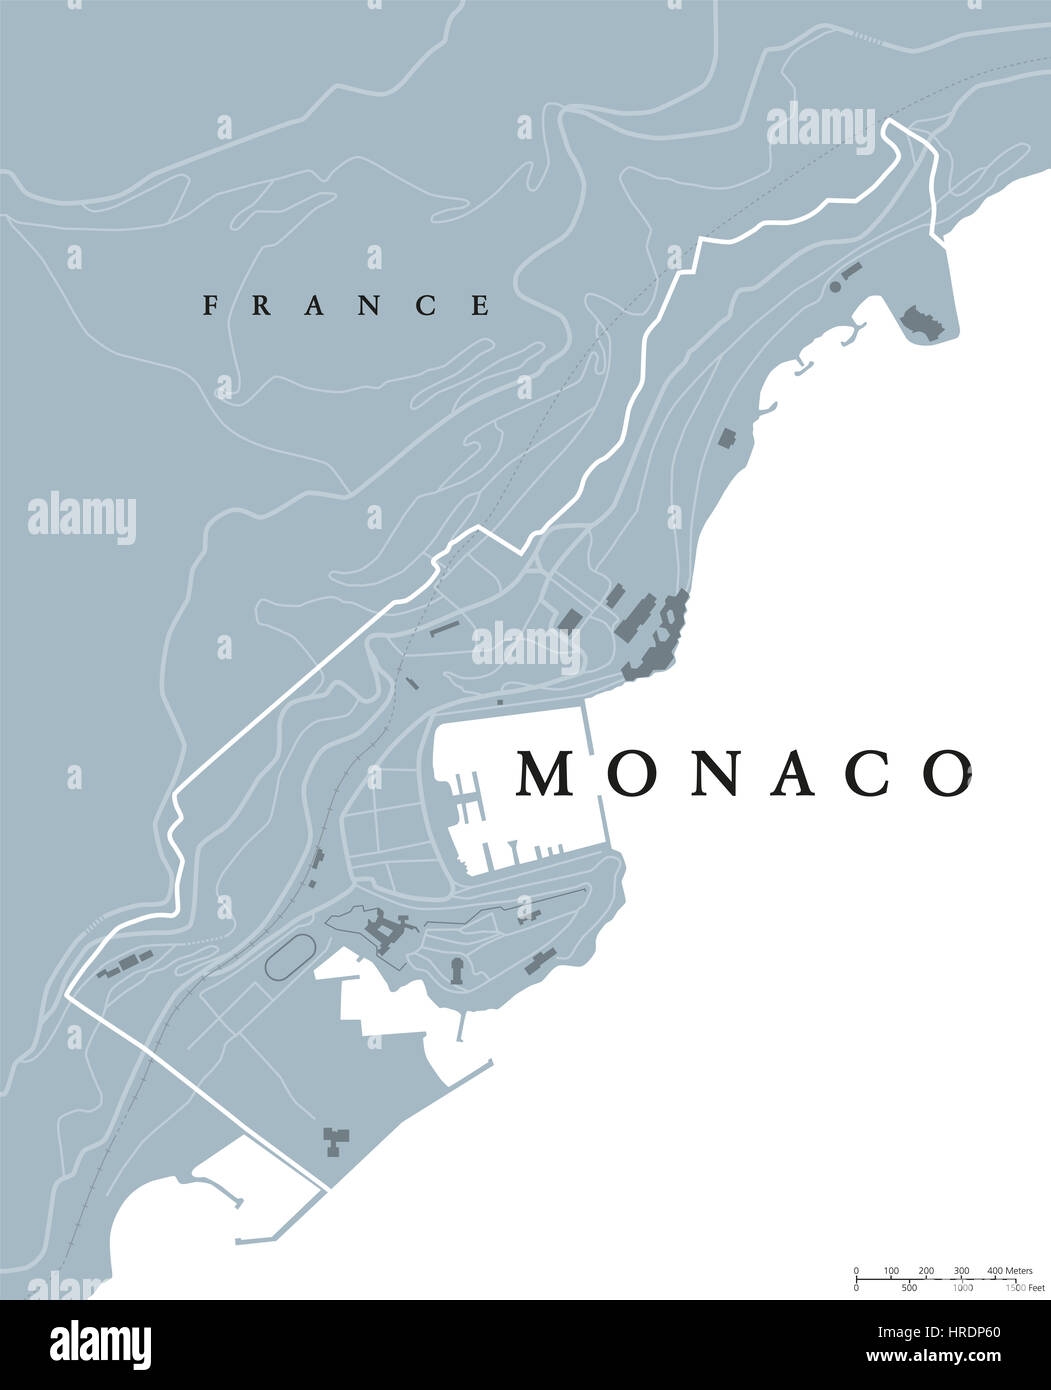 Monaco political map. Principality, sovereign city- and microstate on French Riviera in Western Europe bordering on France. Stock Photo